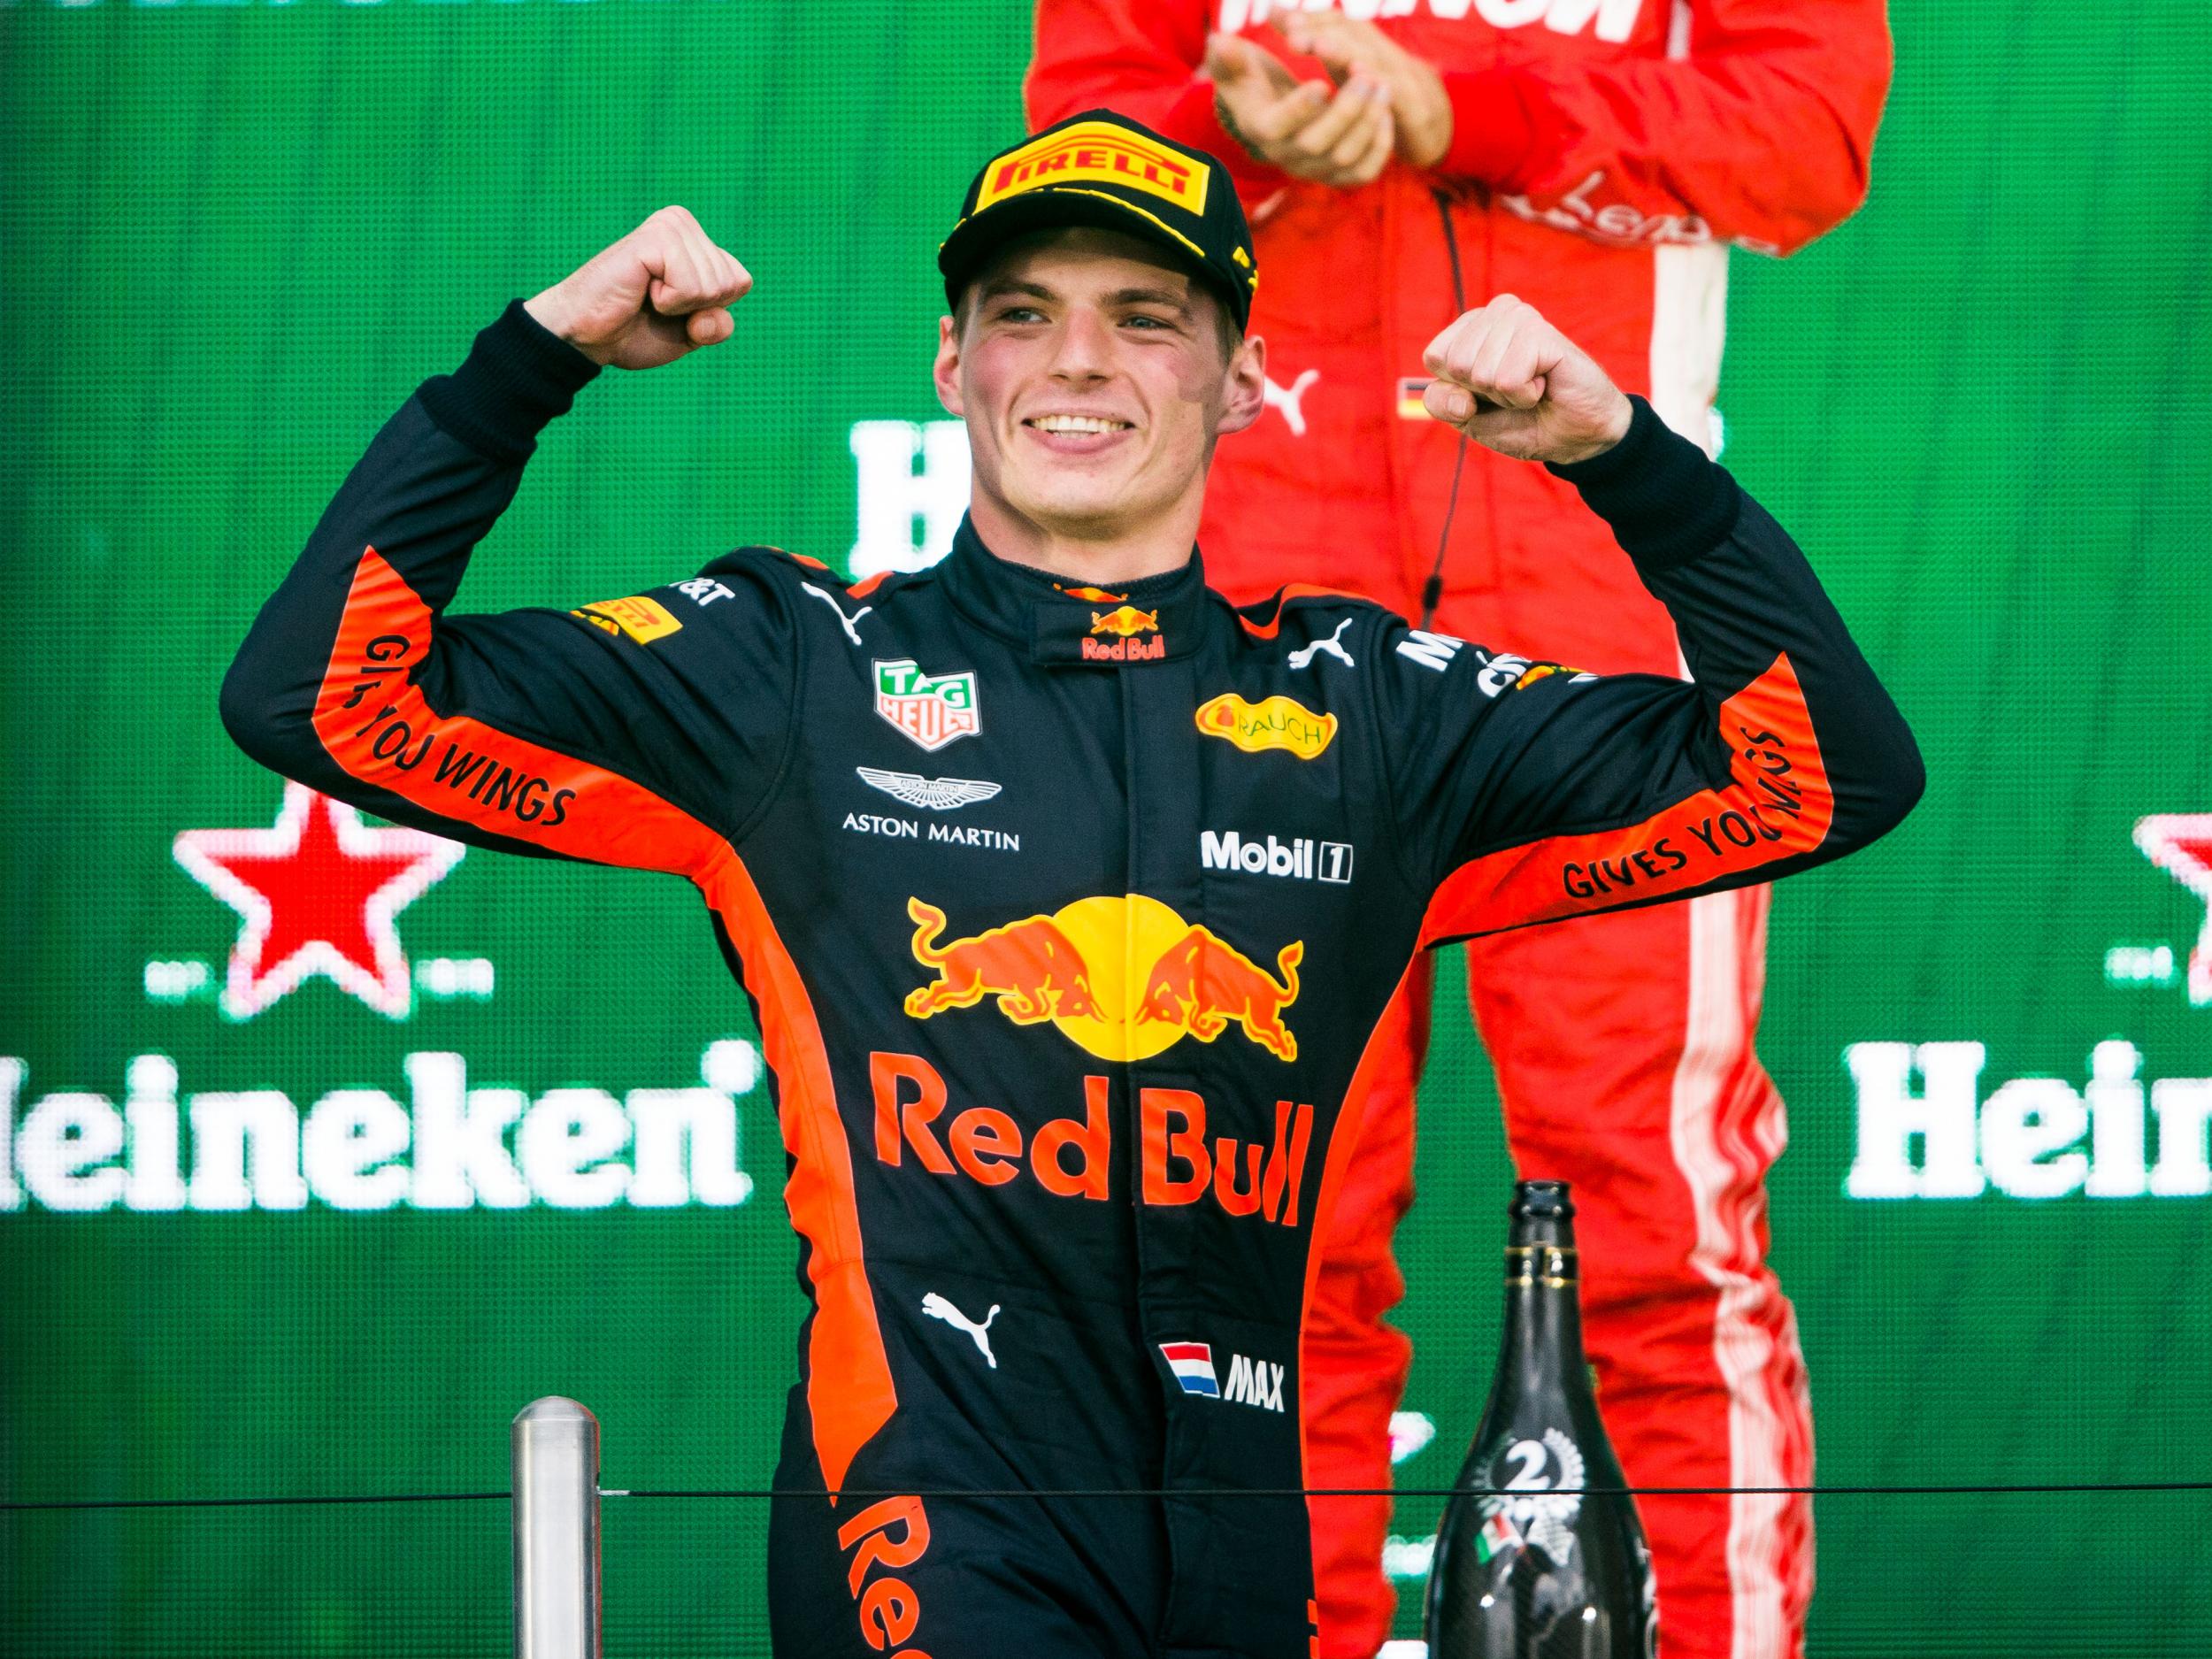 Max Verstappen came of age during the second half of the season